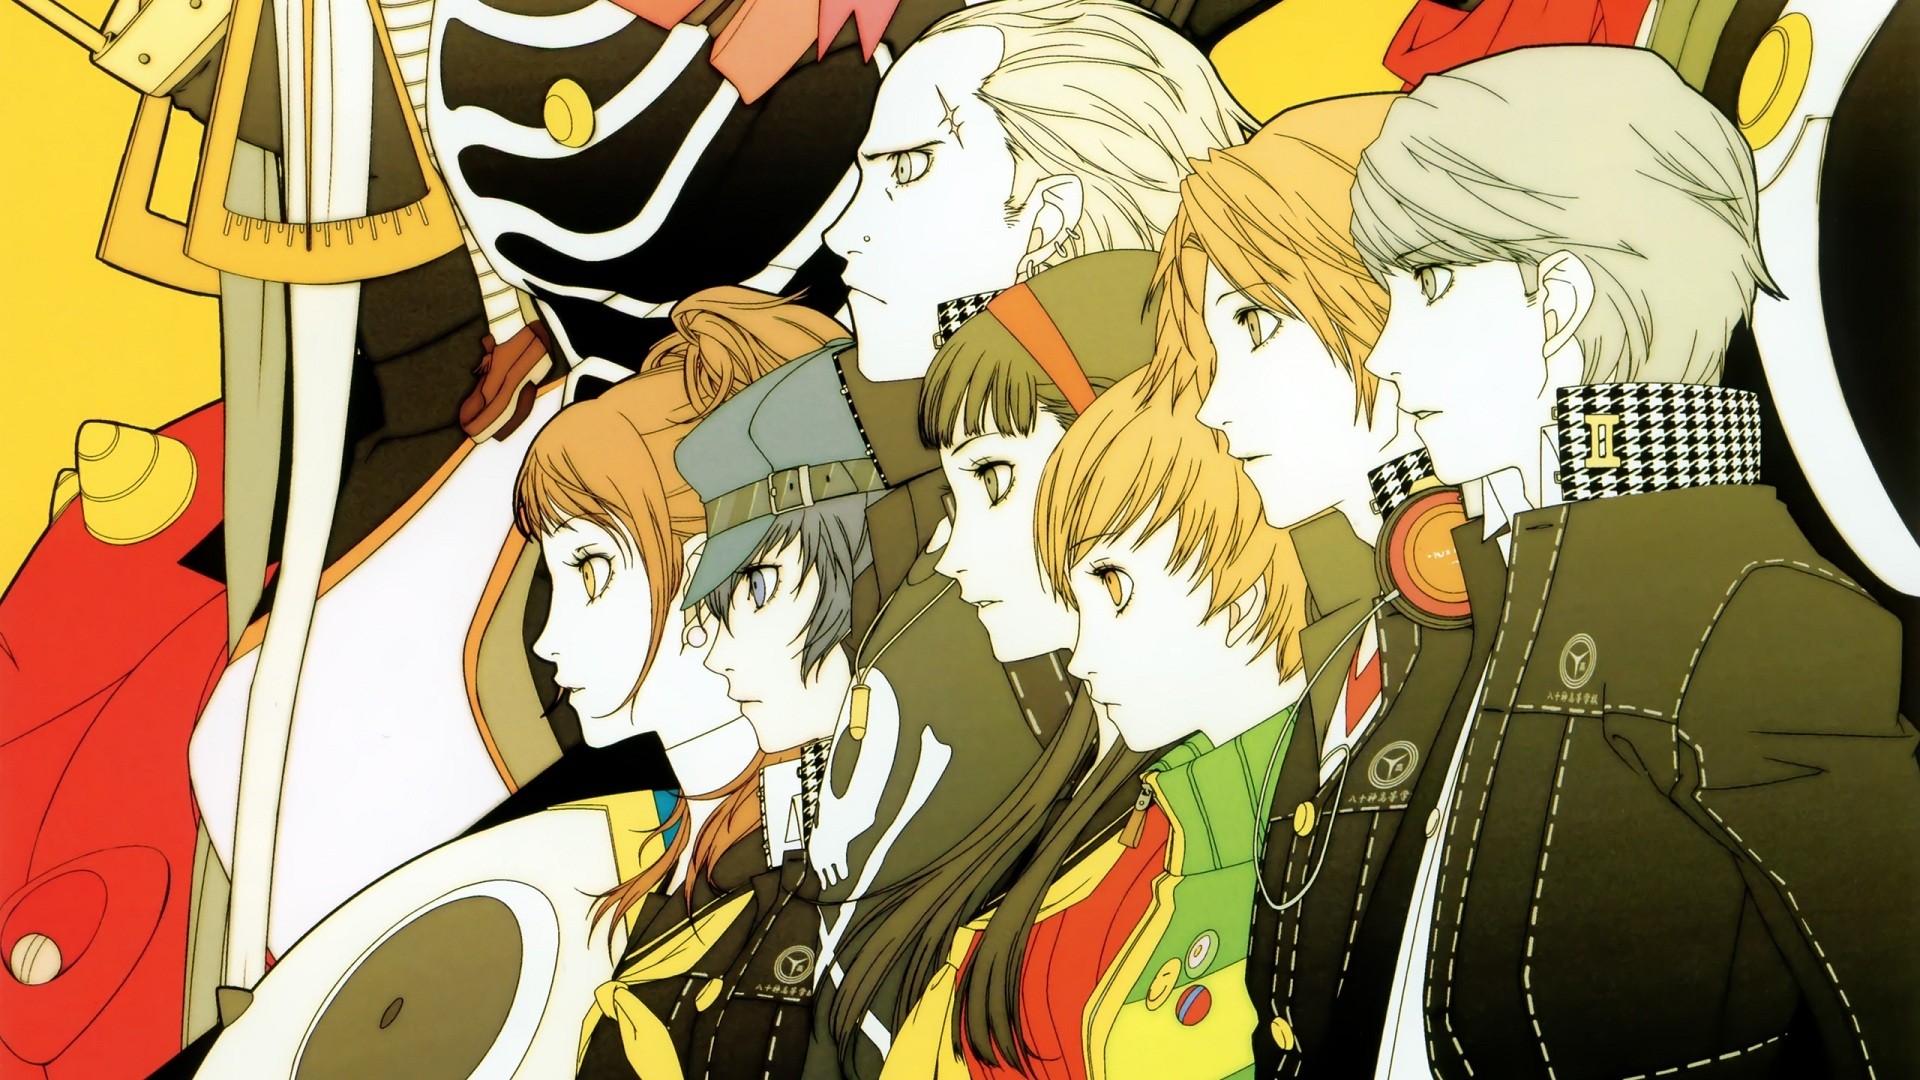 Free Download Persona 4 Wallpaper 19x1080 Persona 4 19x1080 For Your Desktop Mobile Tablet Explore 47 Persona 4 Iphone Wallpaper Persona 4 Hd Wallpaper Persona Q Wallpaper Persona 4 Golden Wallpaper